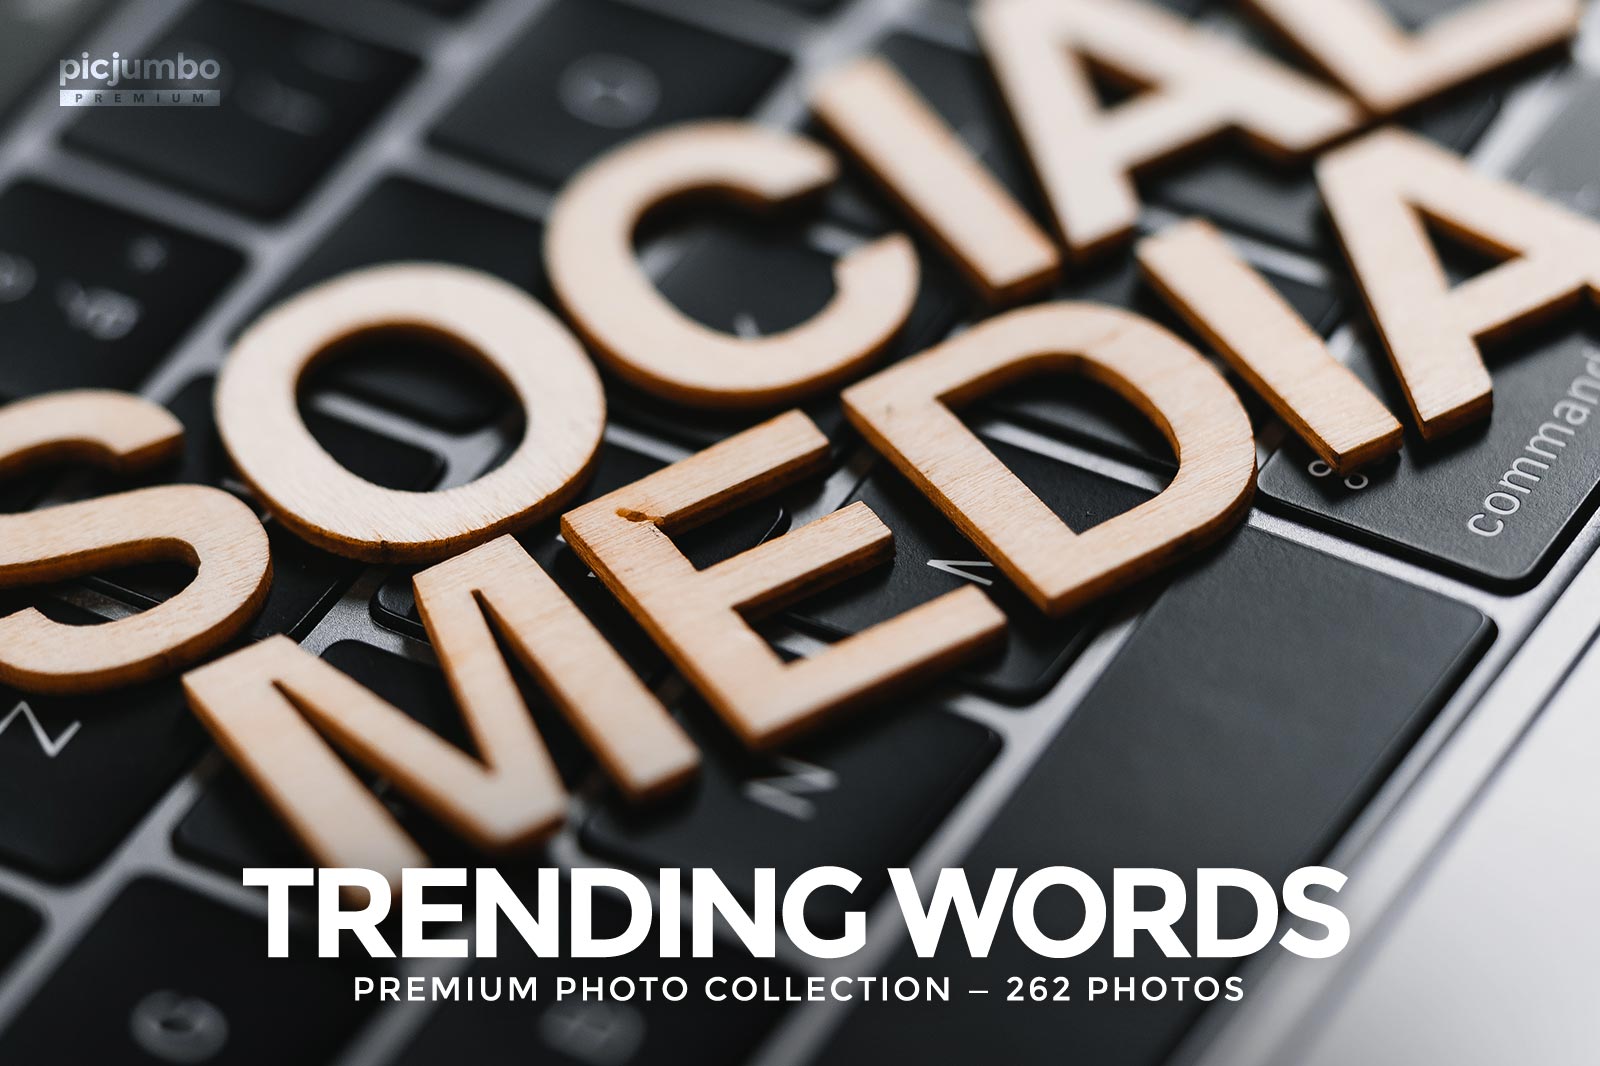 Download hi-res stock photos from our Trending Words PREMIUM Collection!